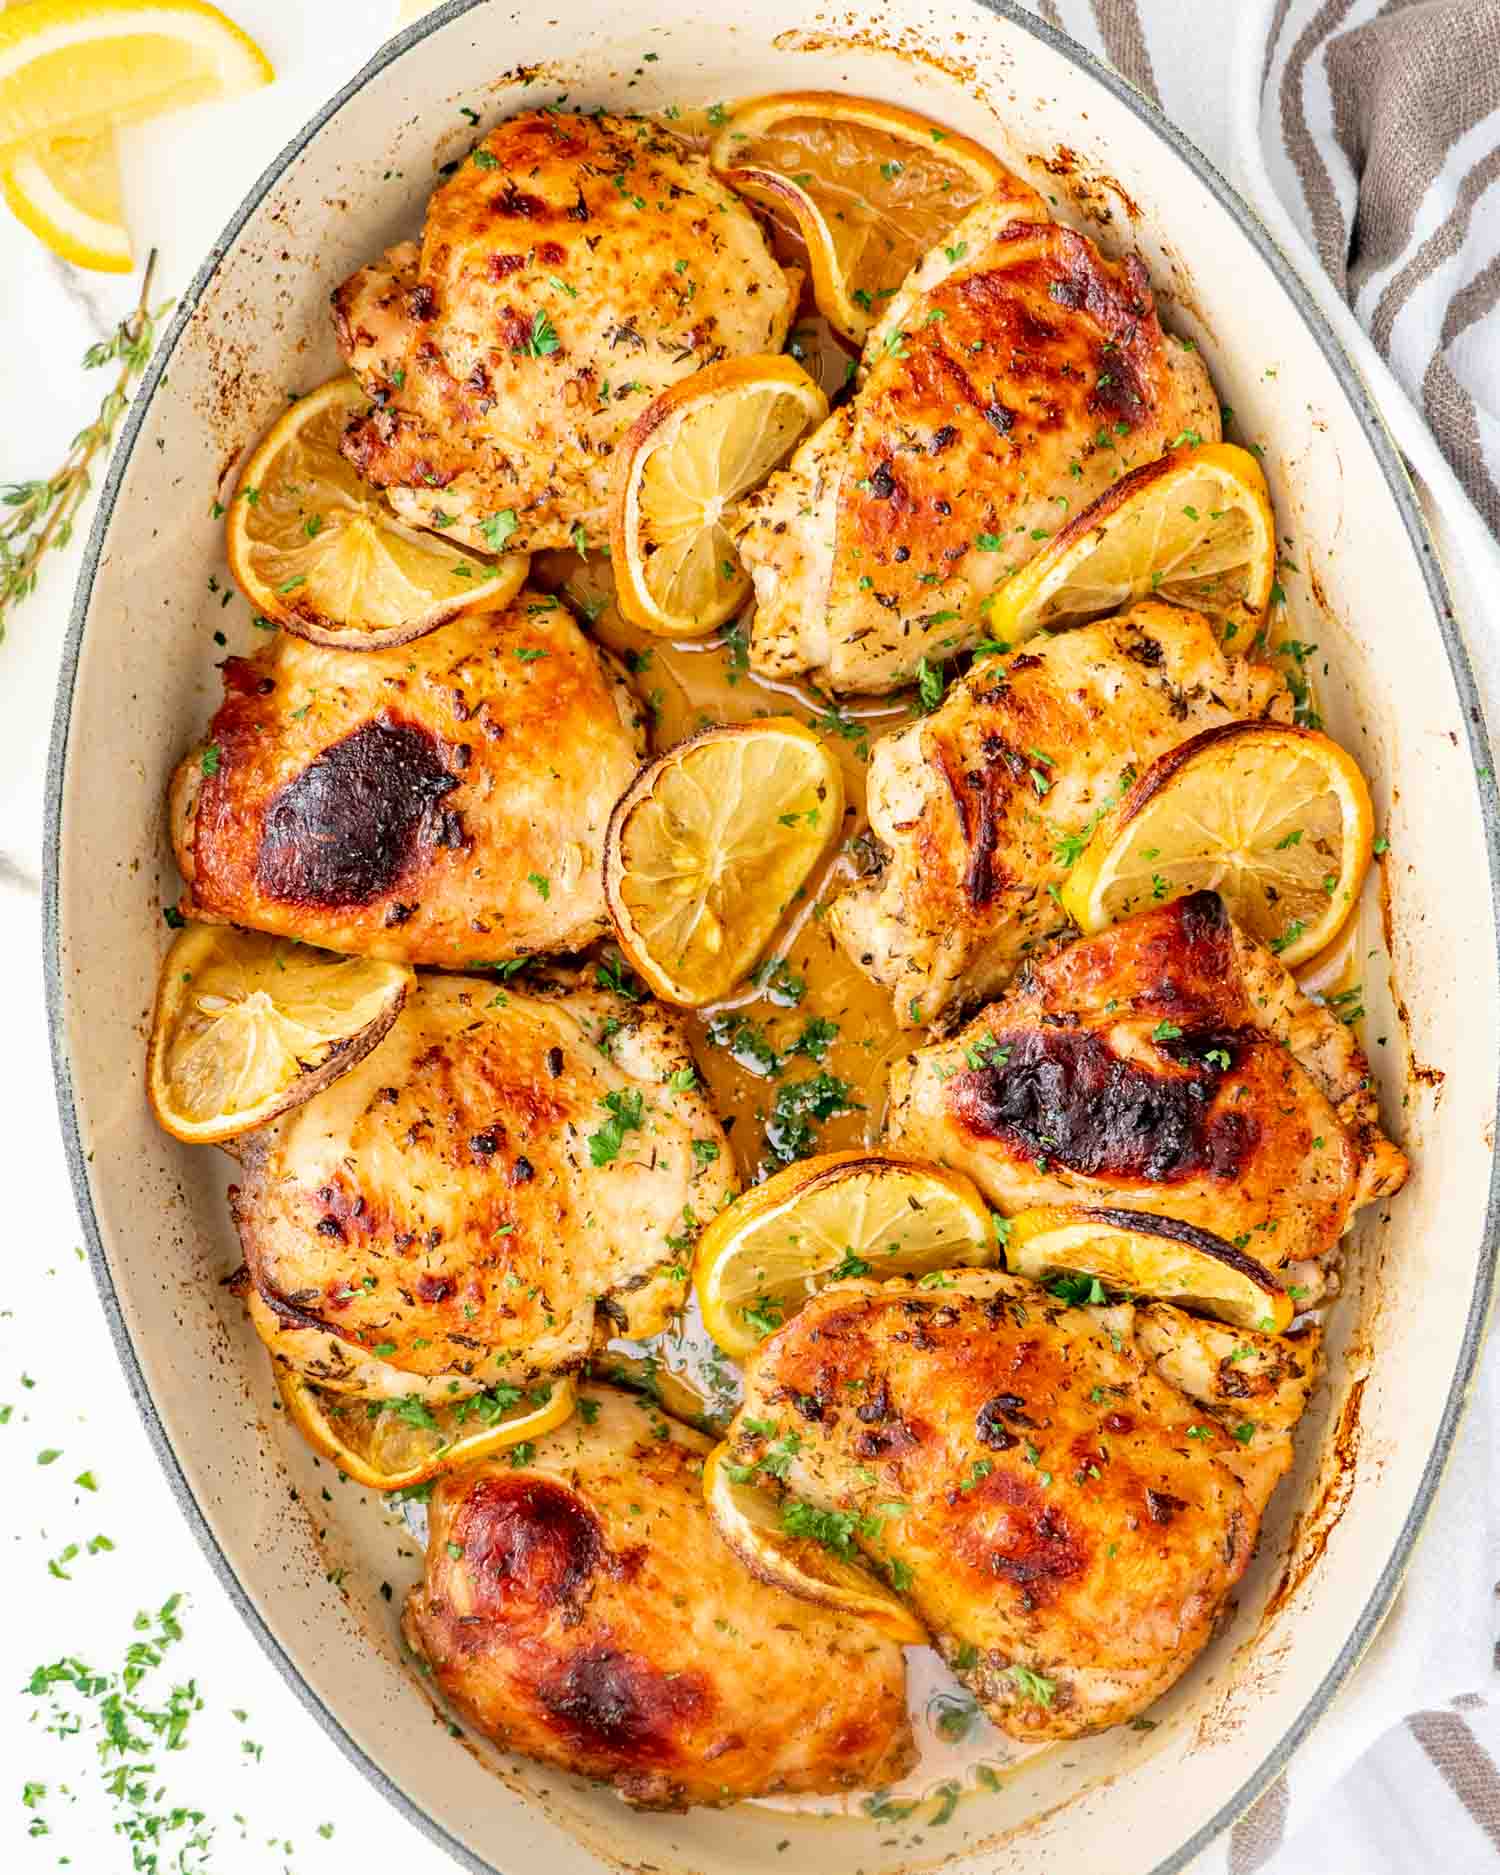 baked lemon chicken thighs in a oval baking dish garnished with parsley.